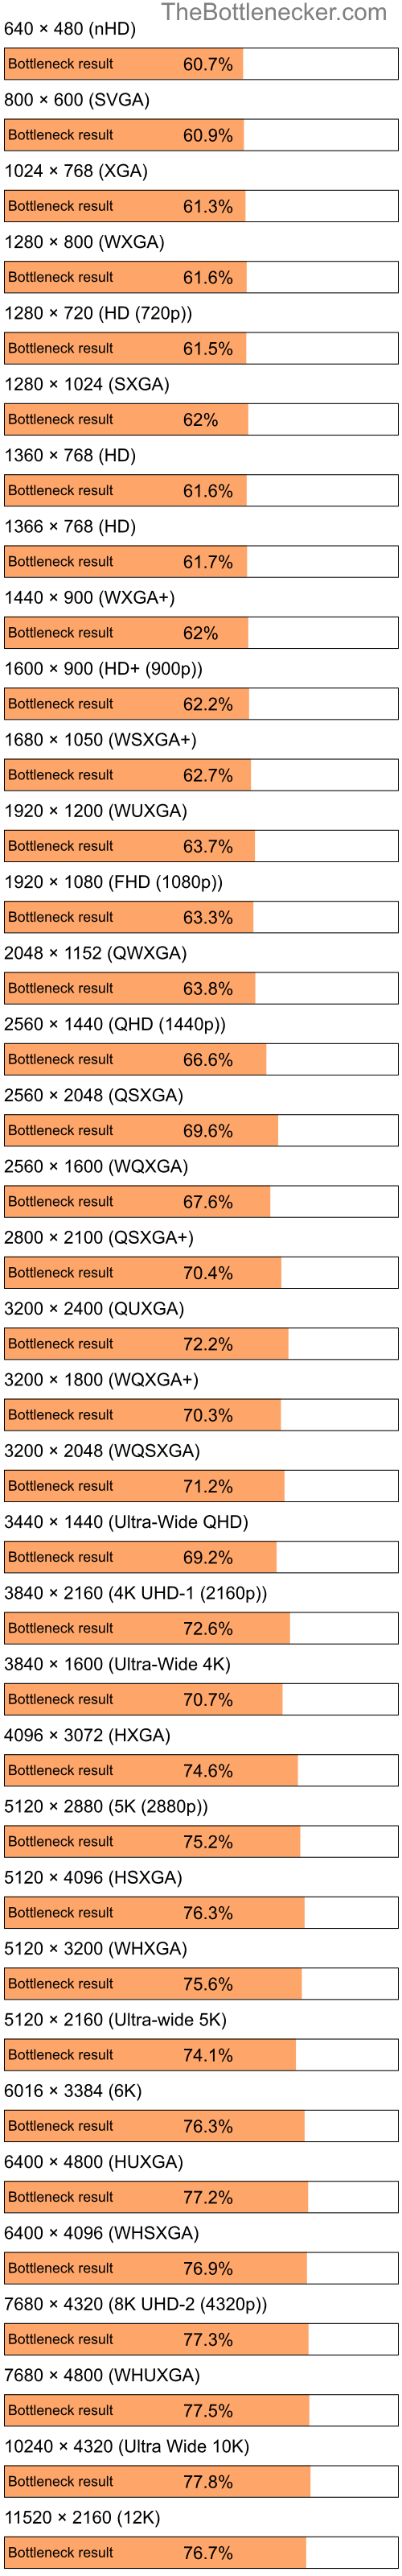 Bottleneck results by resolution for Intel Celeron and AMD Mobility Radeon HD 2400 XT in7 Days to Die